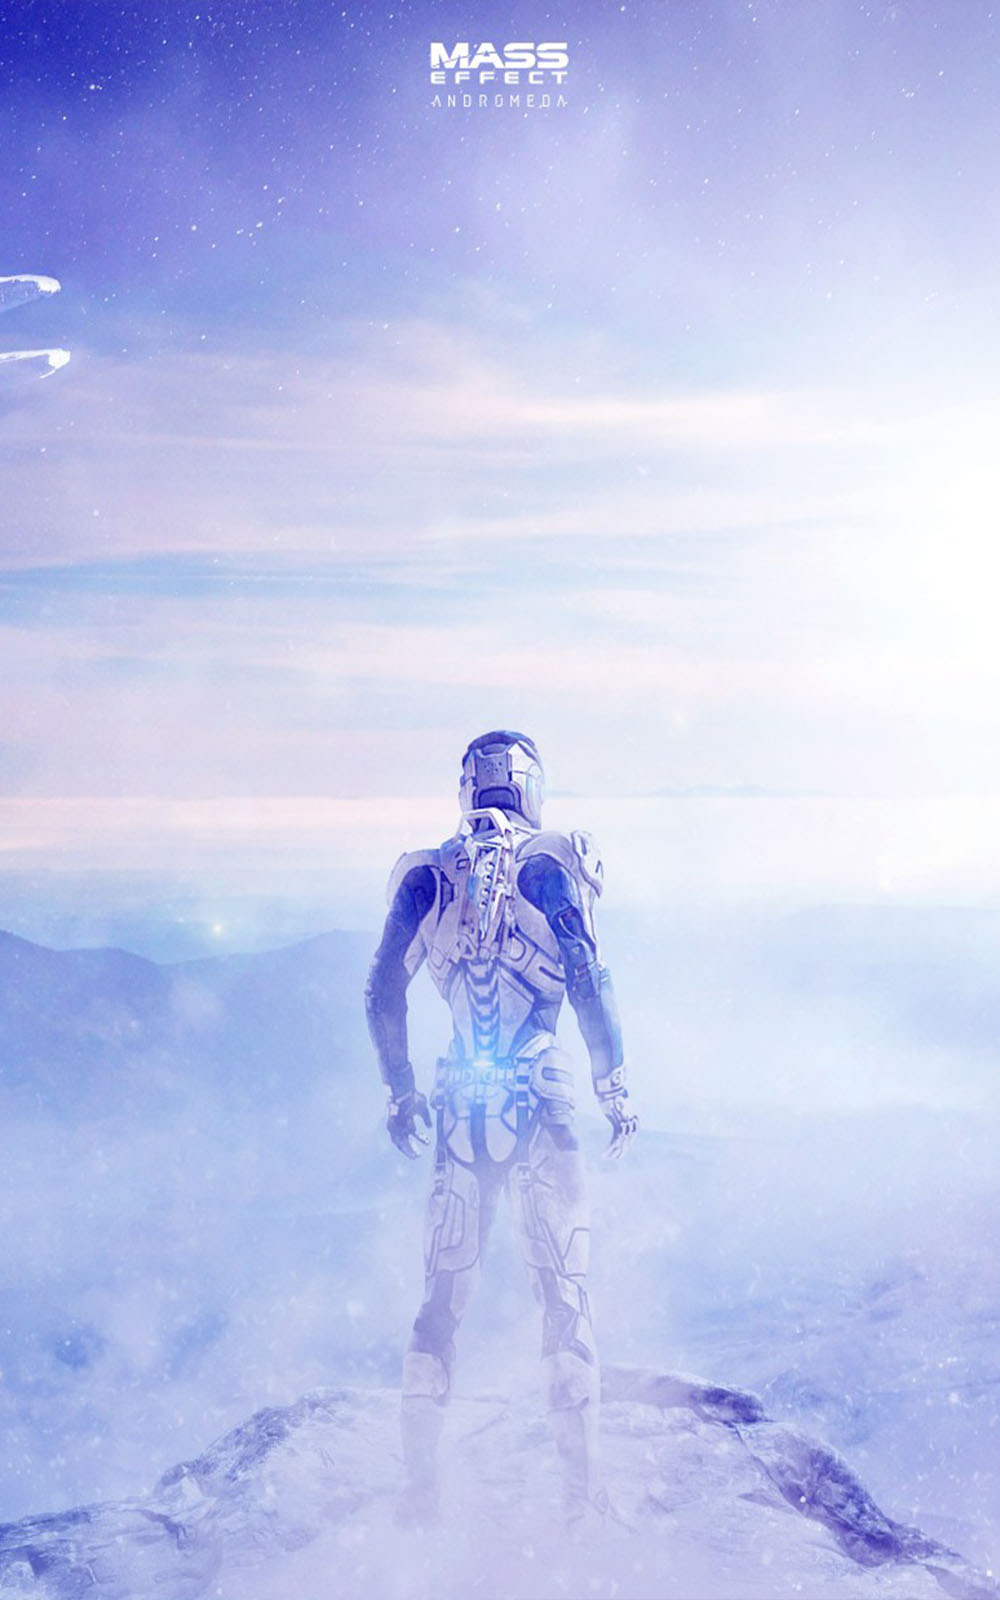 Mass Effect - Andromeda - Download Free HD Mobile Wallpapers